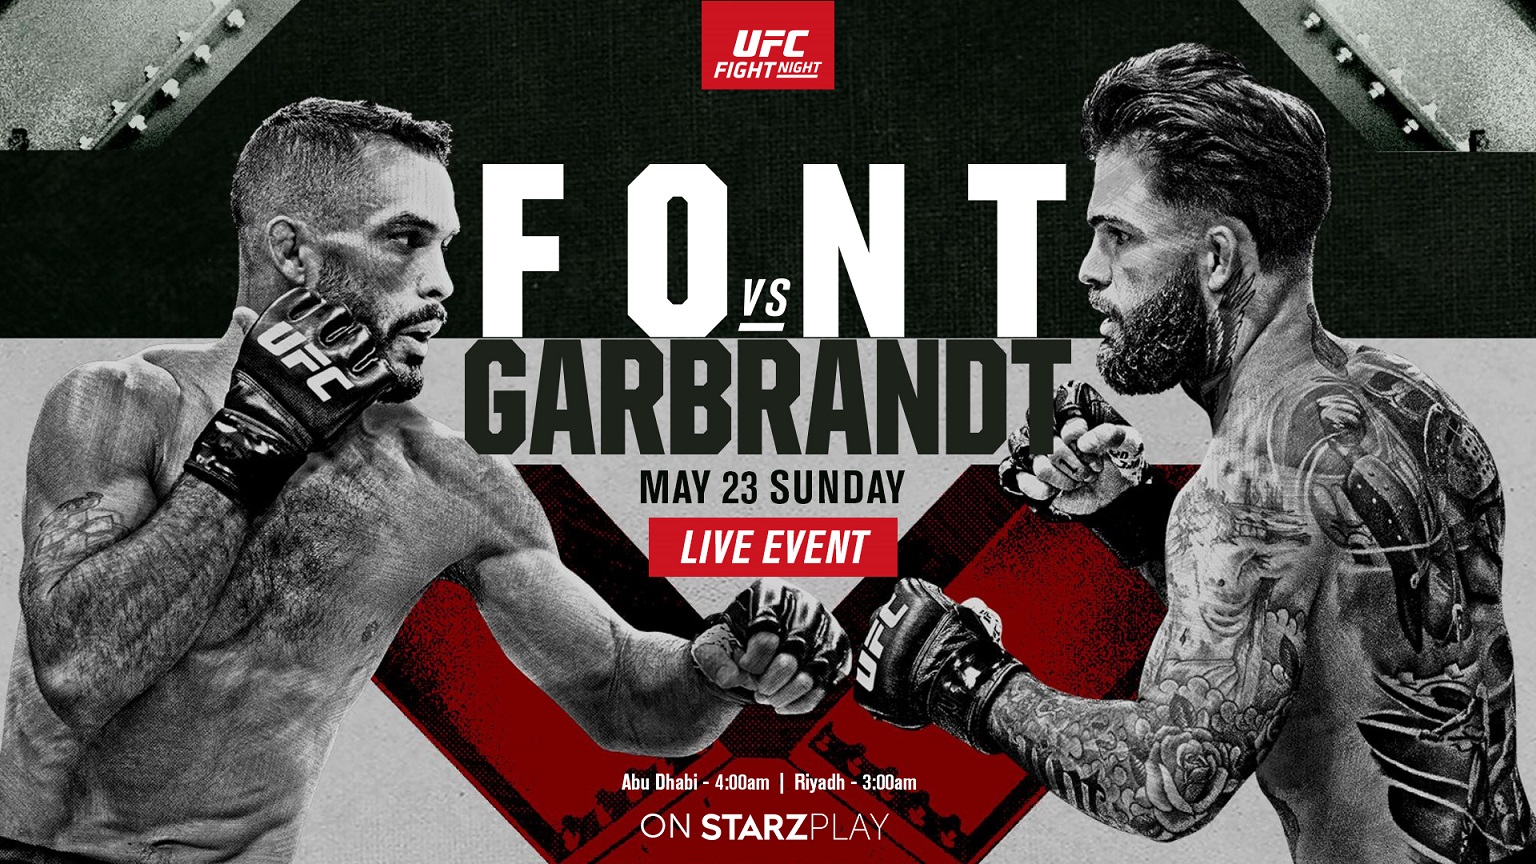 Gear Up To Watch The Thrilling UFC Bout Between Rob Font And Cody Garbrandt, Live On STARZPLAY